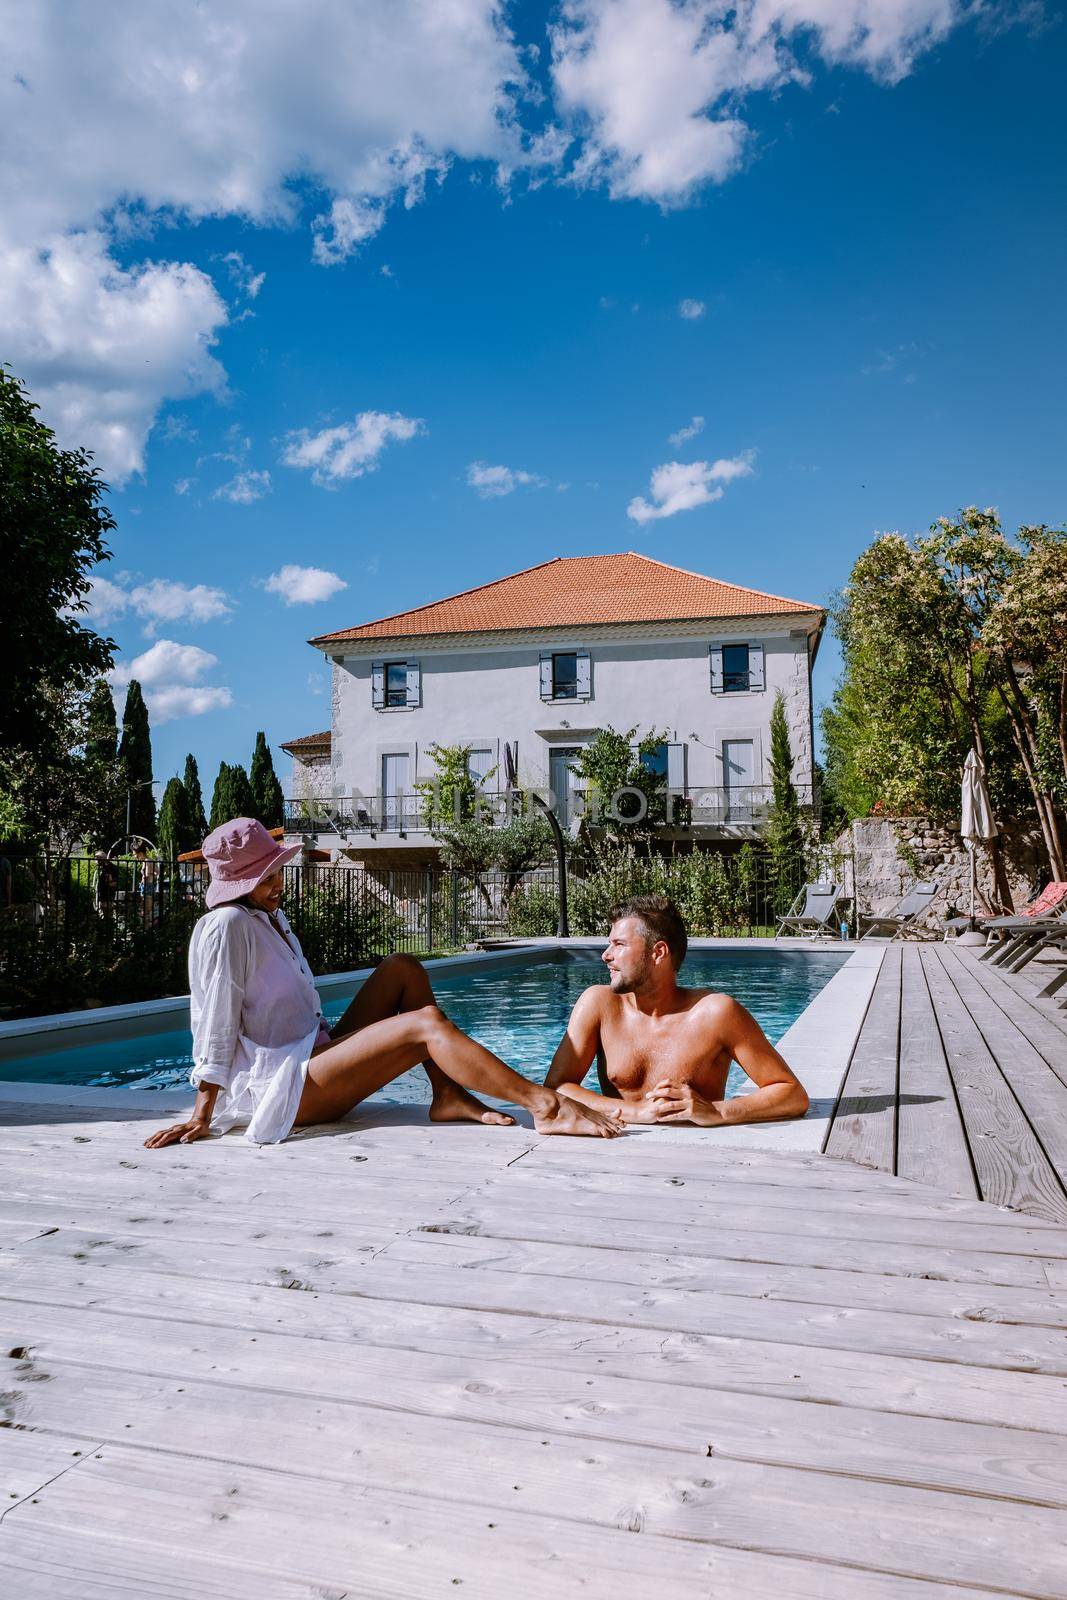 French vacation home with wooden deck and swimming pool in the Ardeche France. Couple relaxing by the pool with wooden deck during luxury vacation at an holiday home in South of France by fokkebok